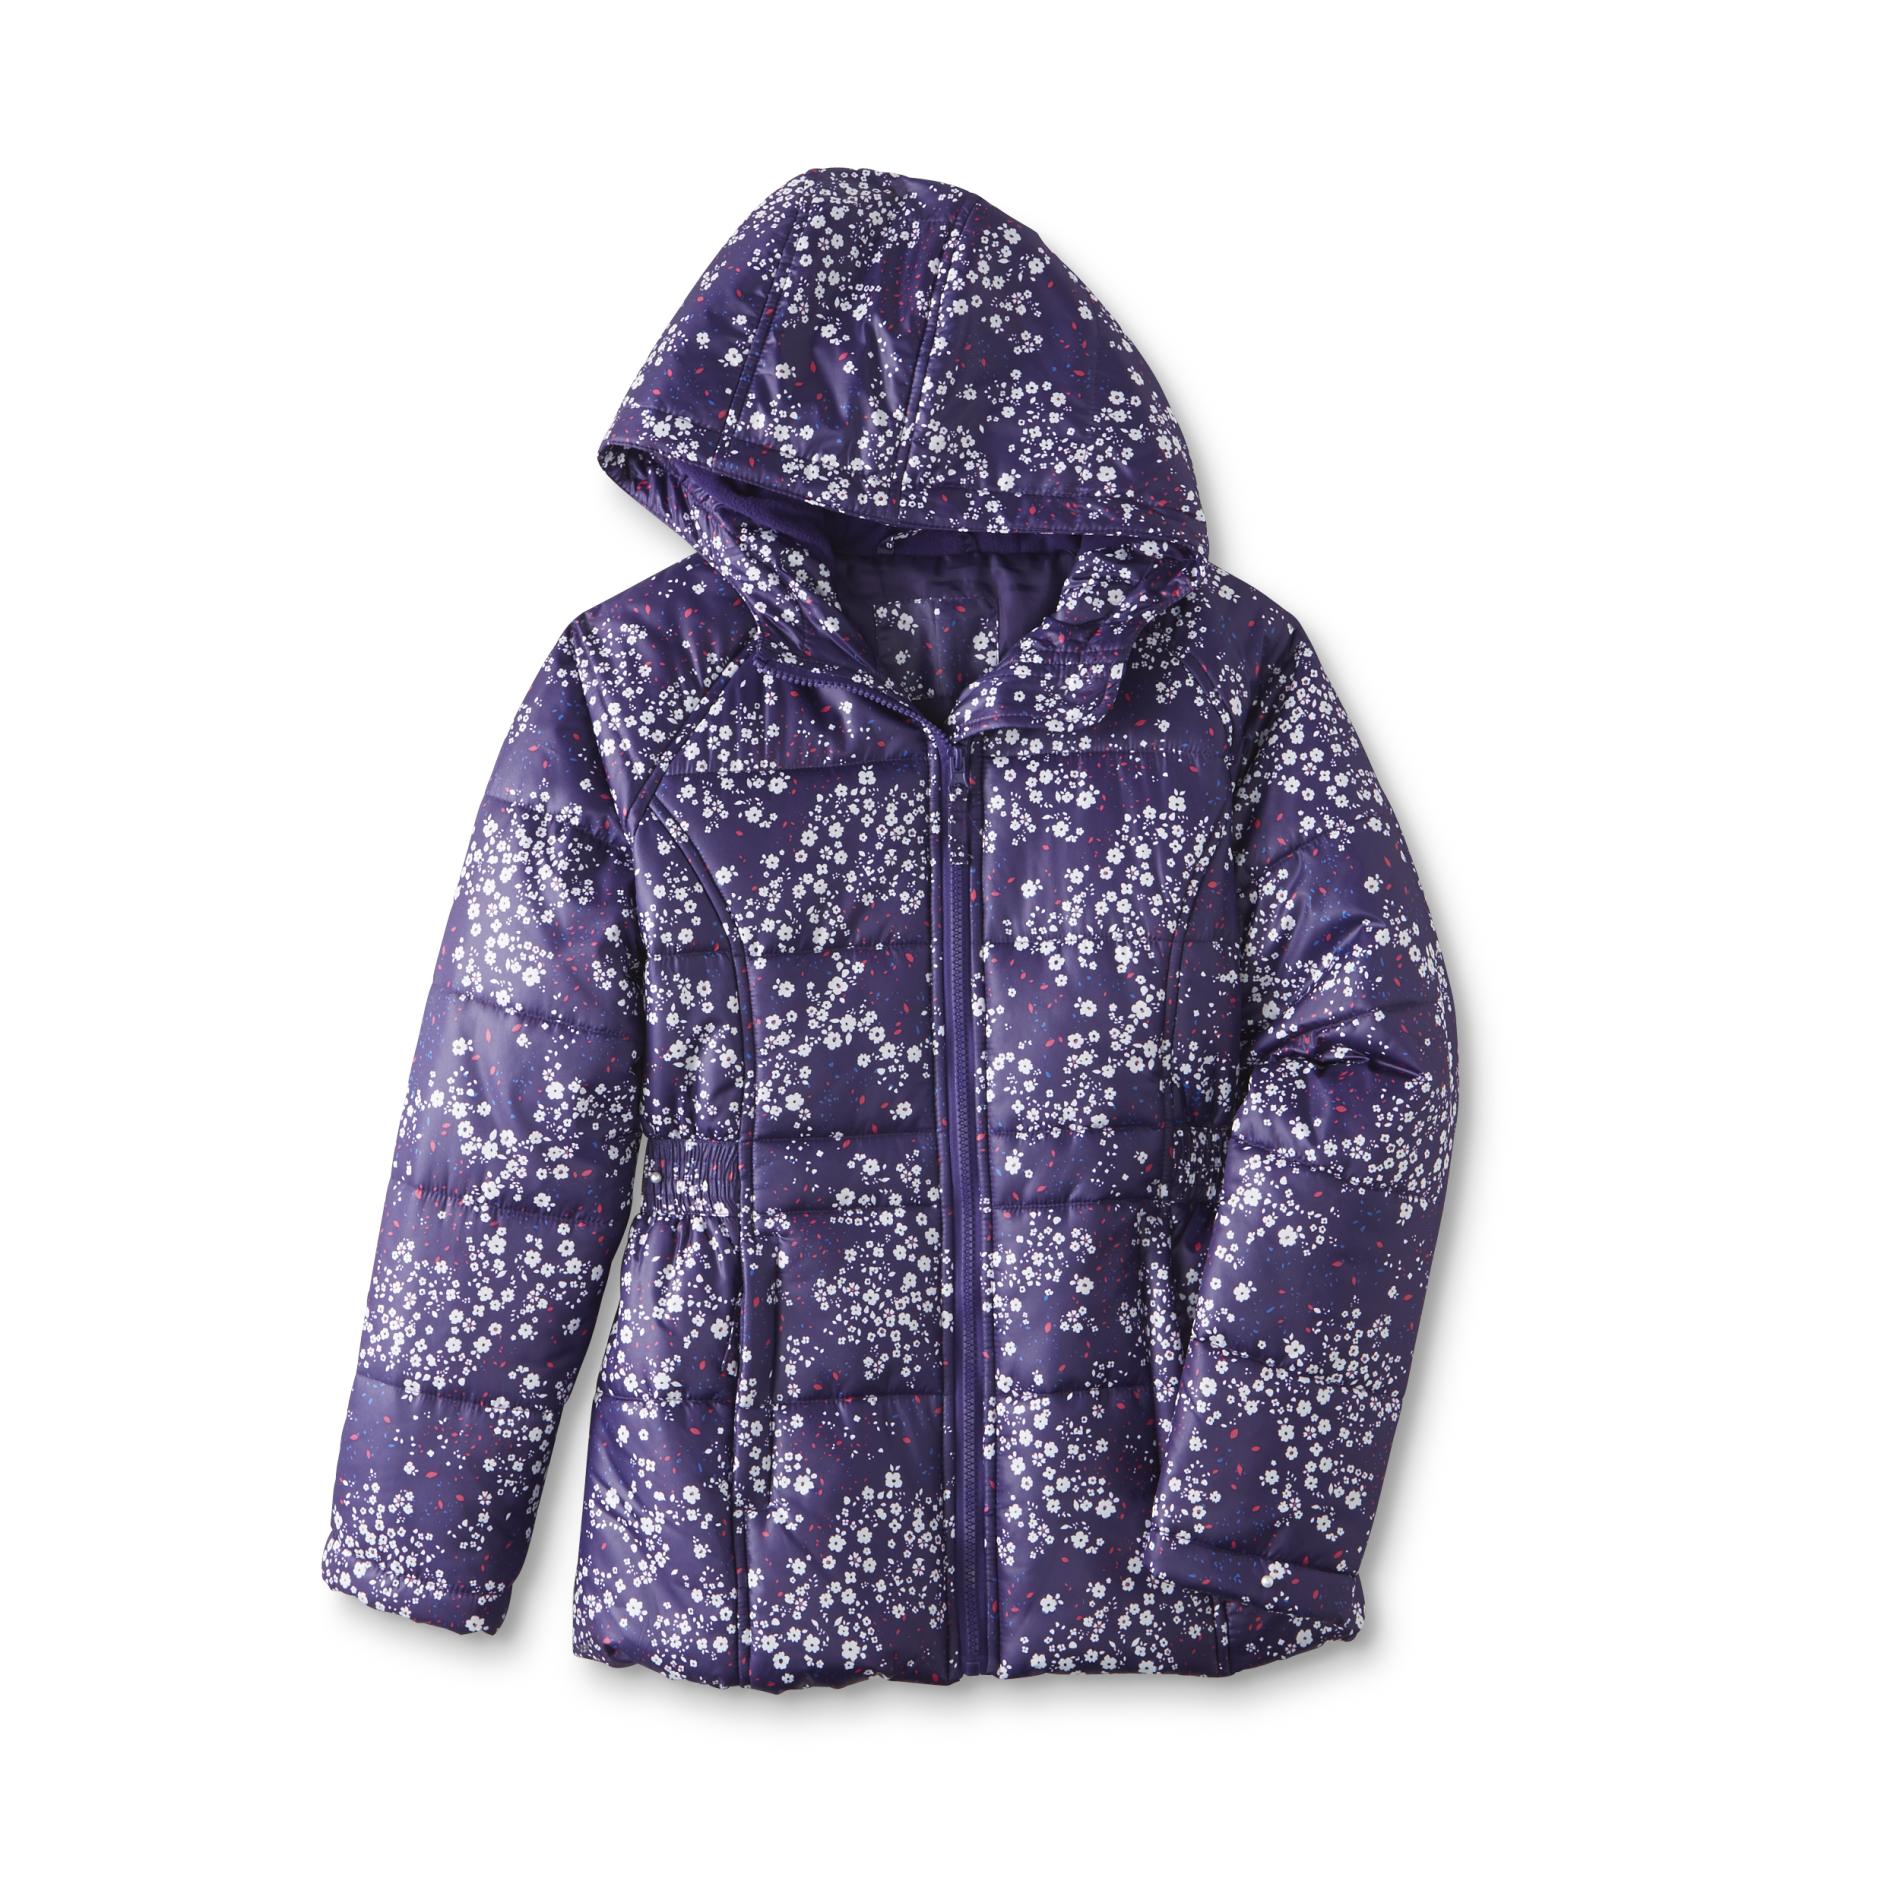 Simply Styled Girl's Hooded Puffer Coat - Floral